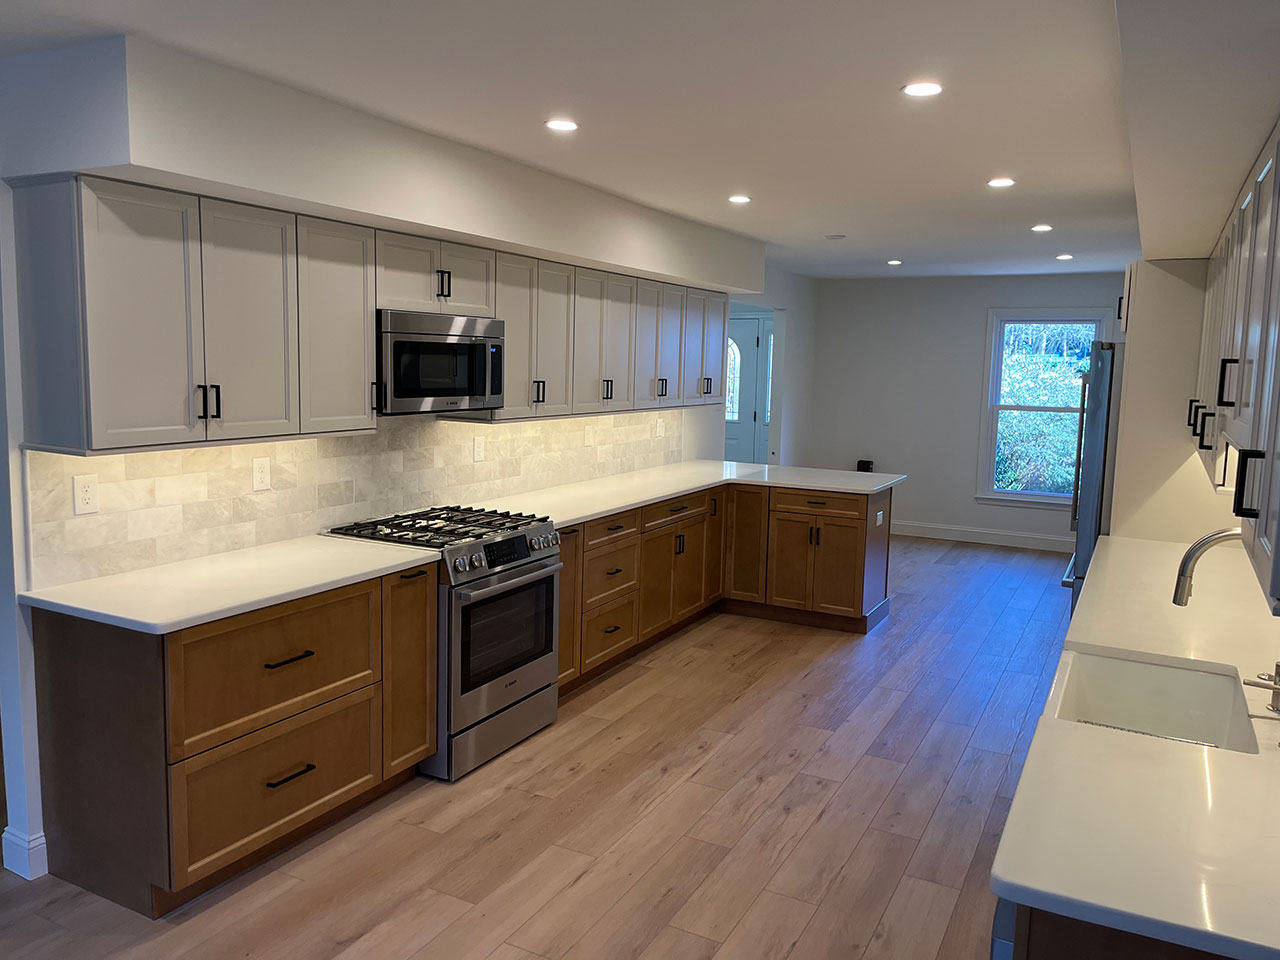 Prince Andrew Ct Kitchen Remodel